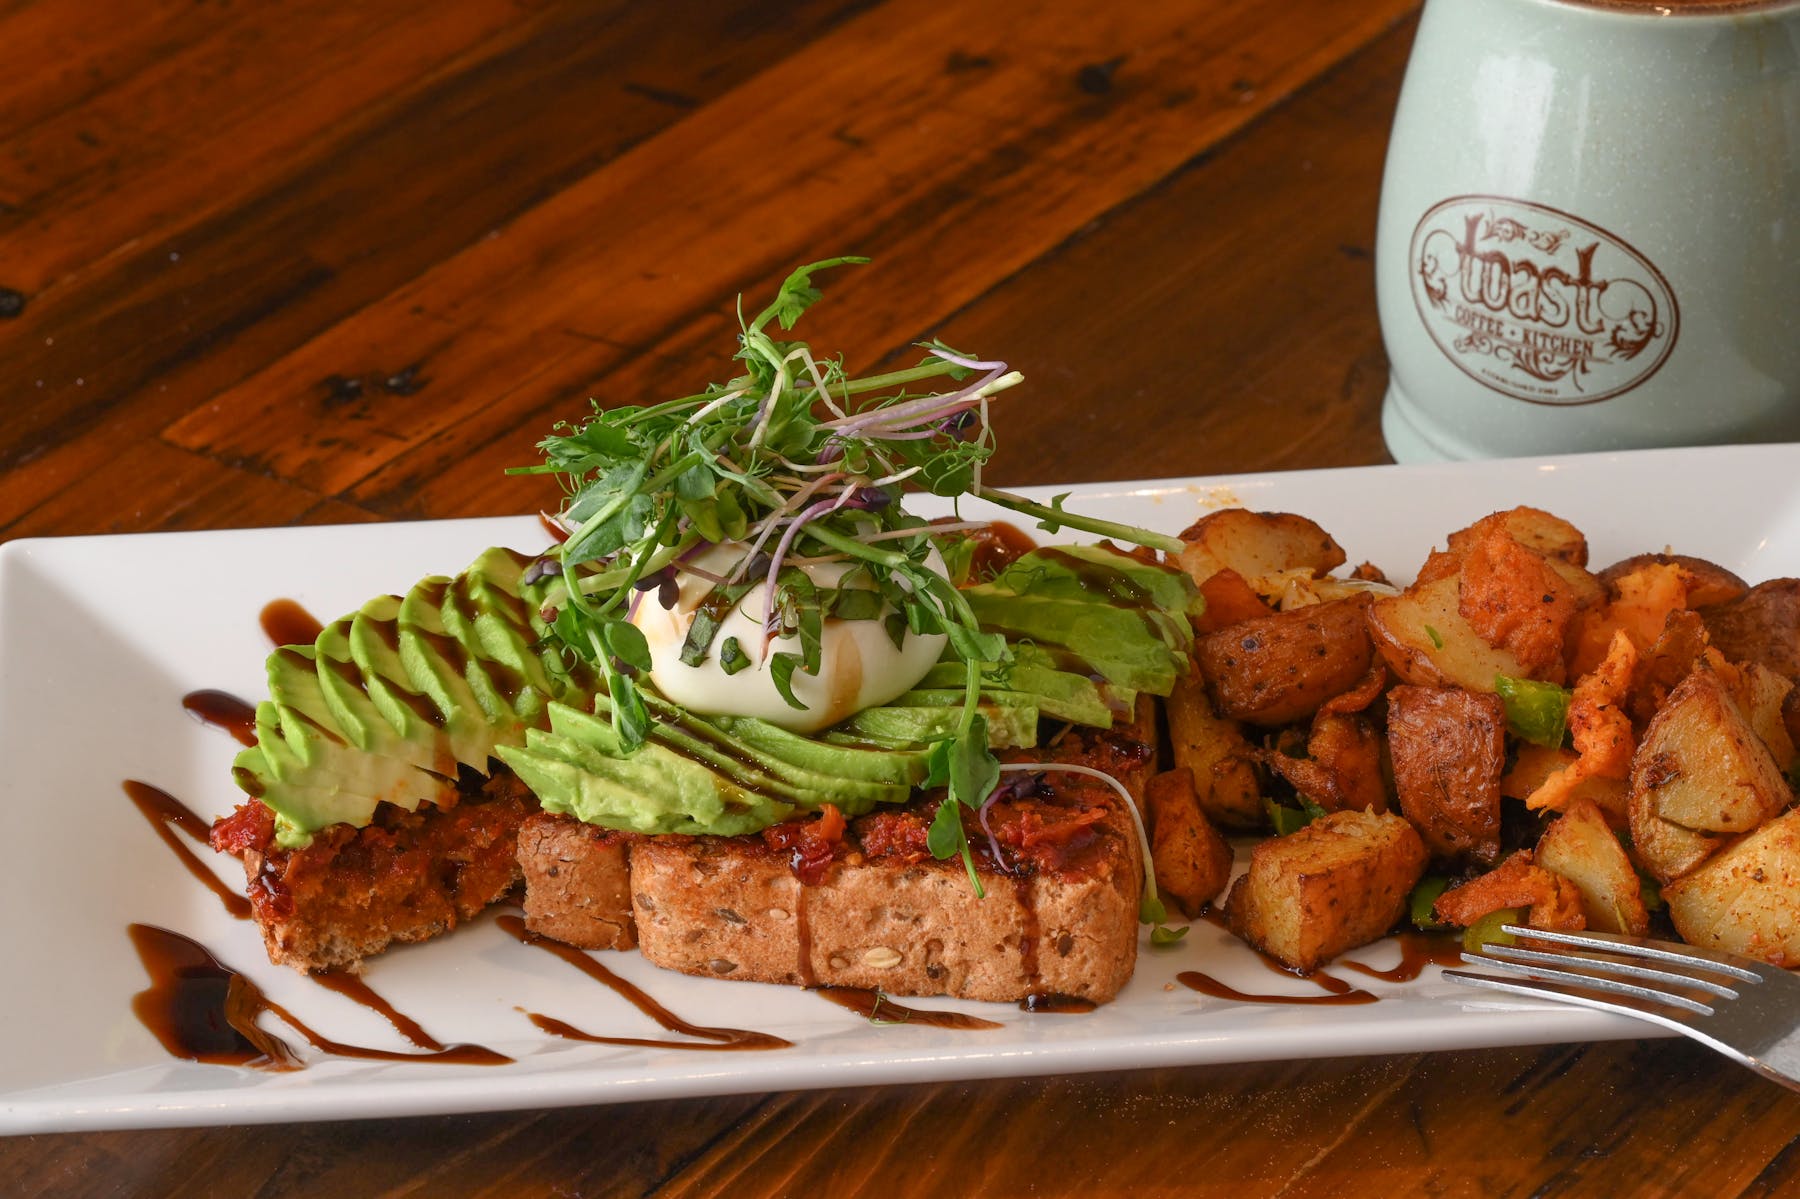 Toast Coffeehouse - Patchogue, NY - Spice up your day with our